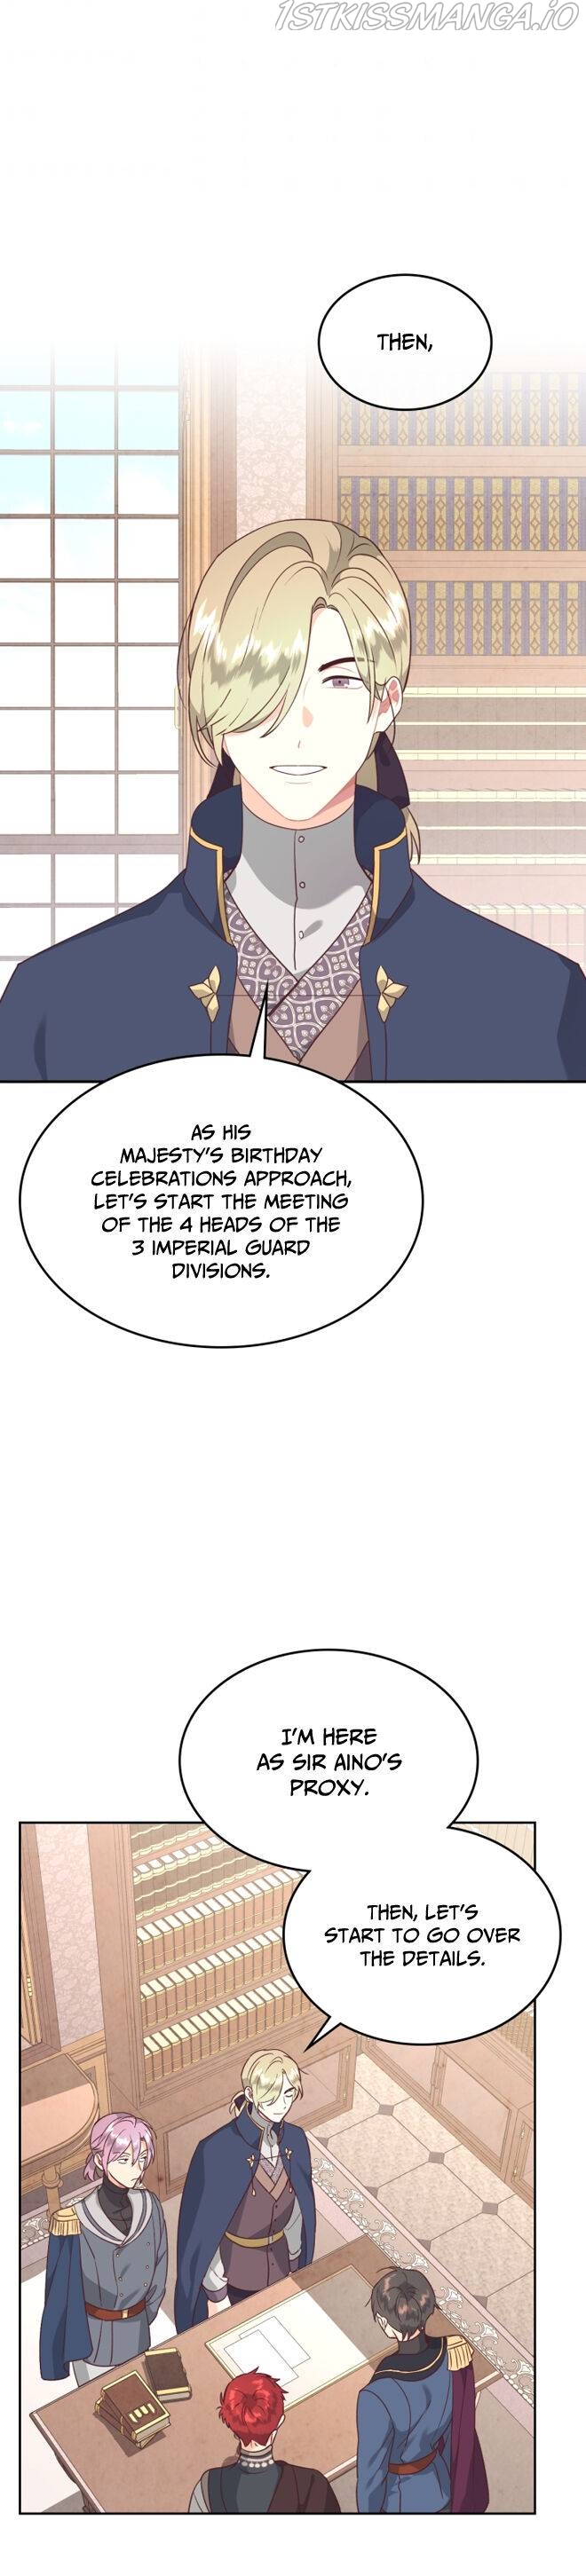 Emperor And The Female Knight ( The King and His Knight ) Chapter 132 - Page 2